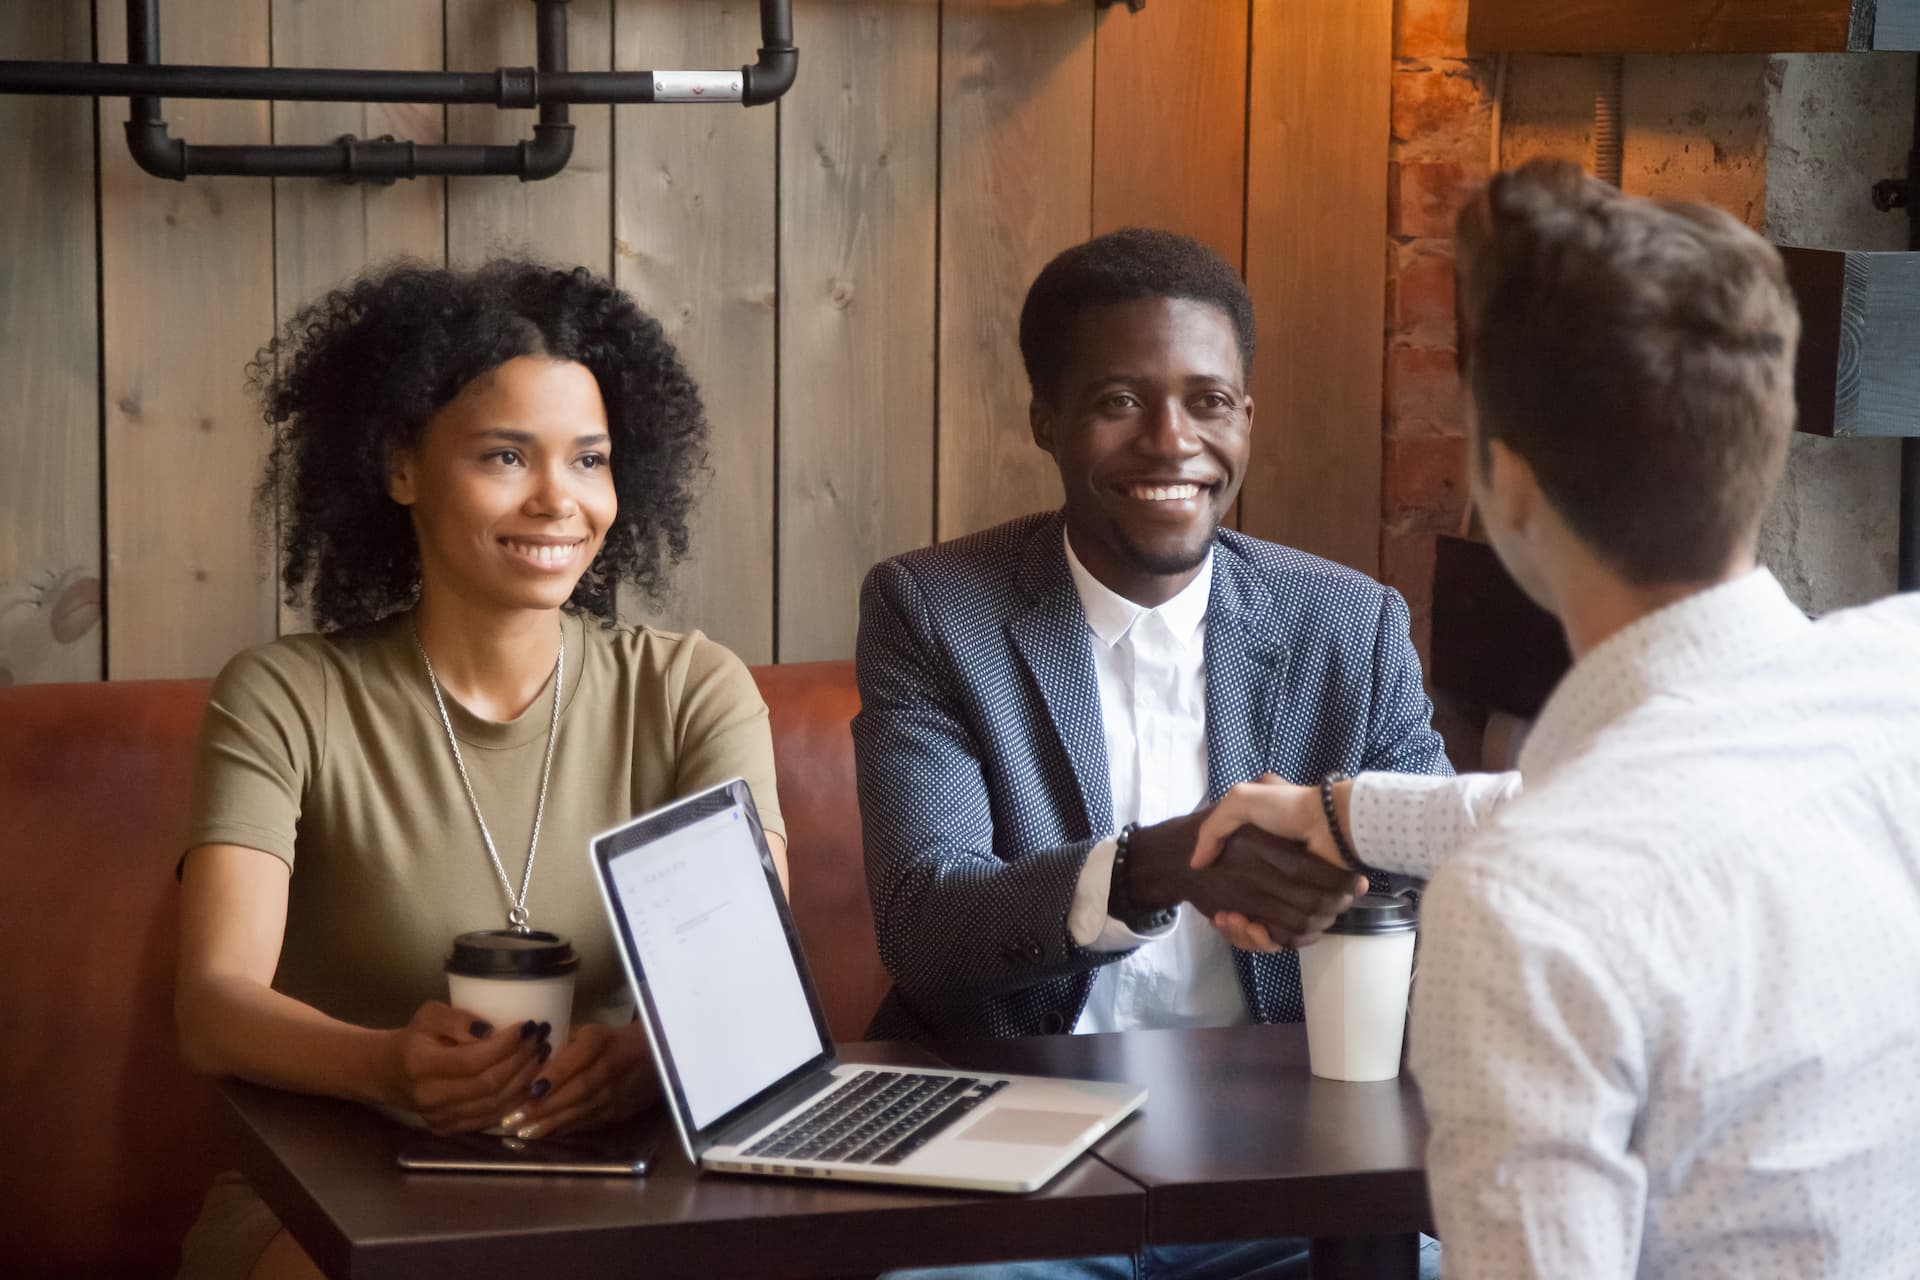 A couple smiling as they shake hands with a professional at a café meeting, illustrating the power of networking for introverts.